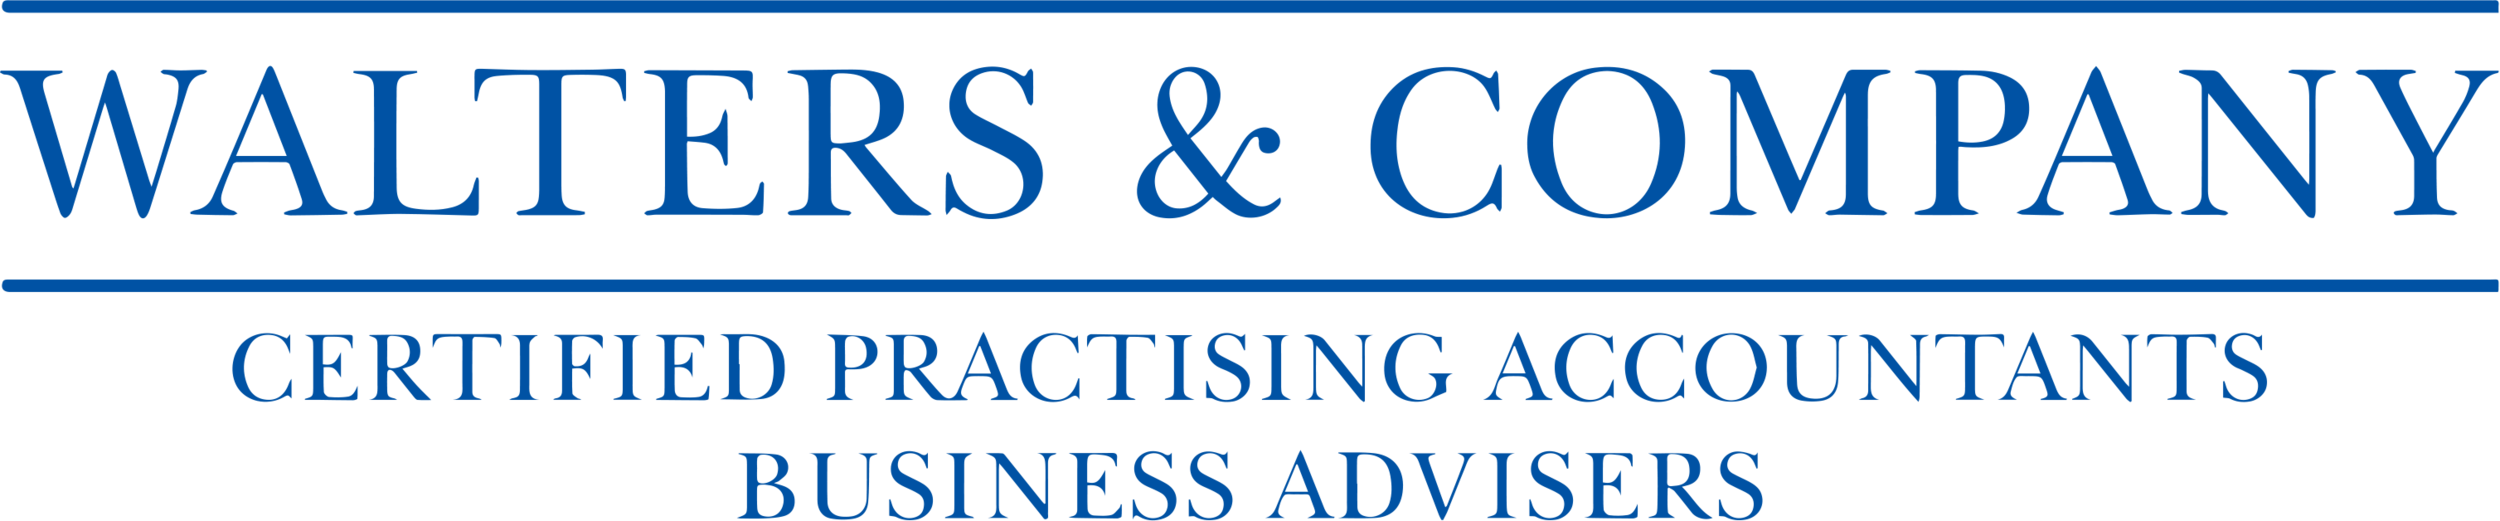 Walters &amp; Company - Certified Practising Accountants &amp; Business Advisers, Great Dunmow, Essex